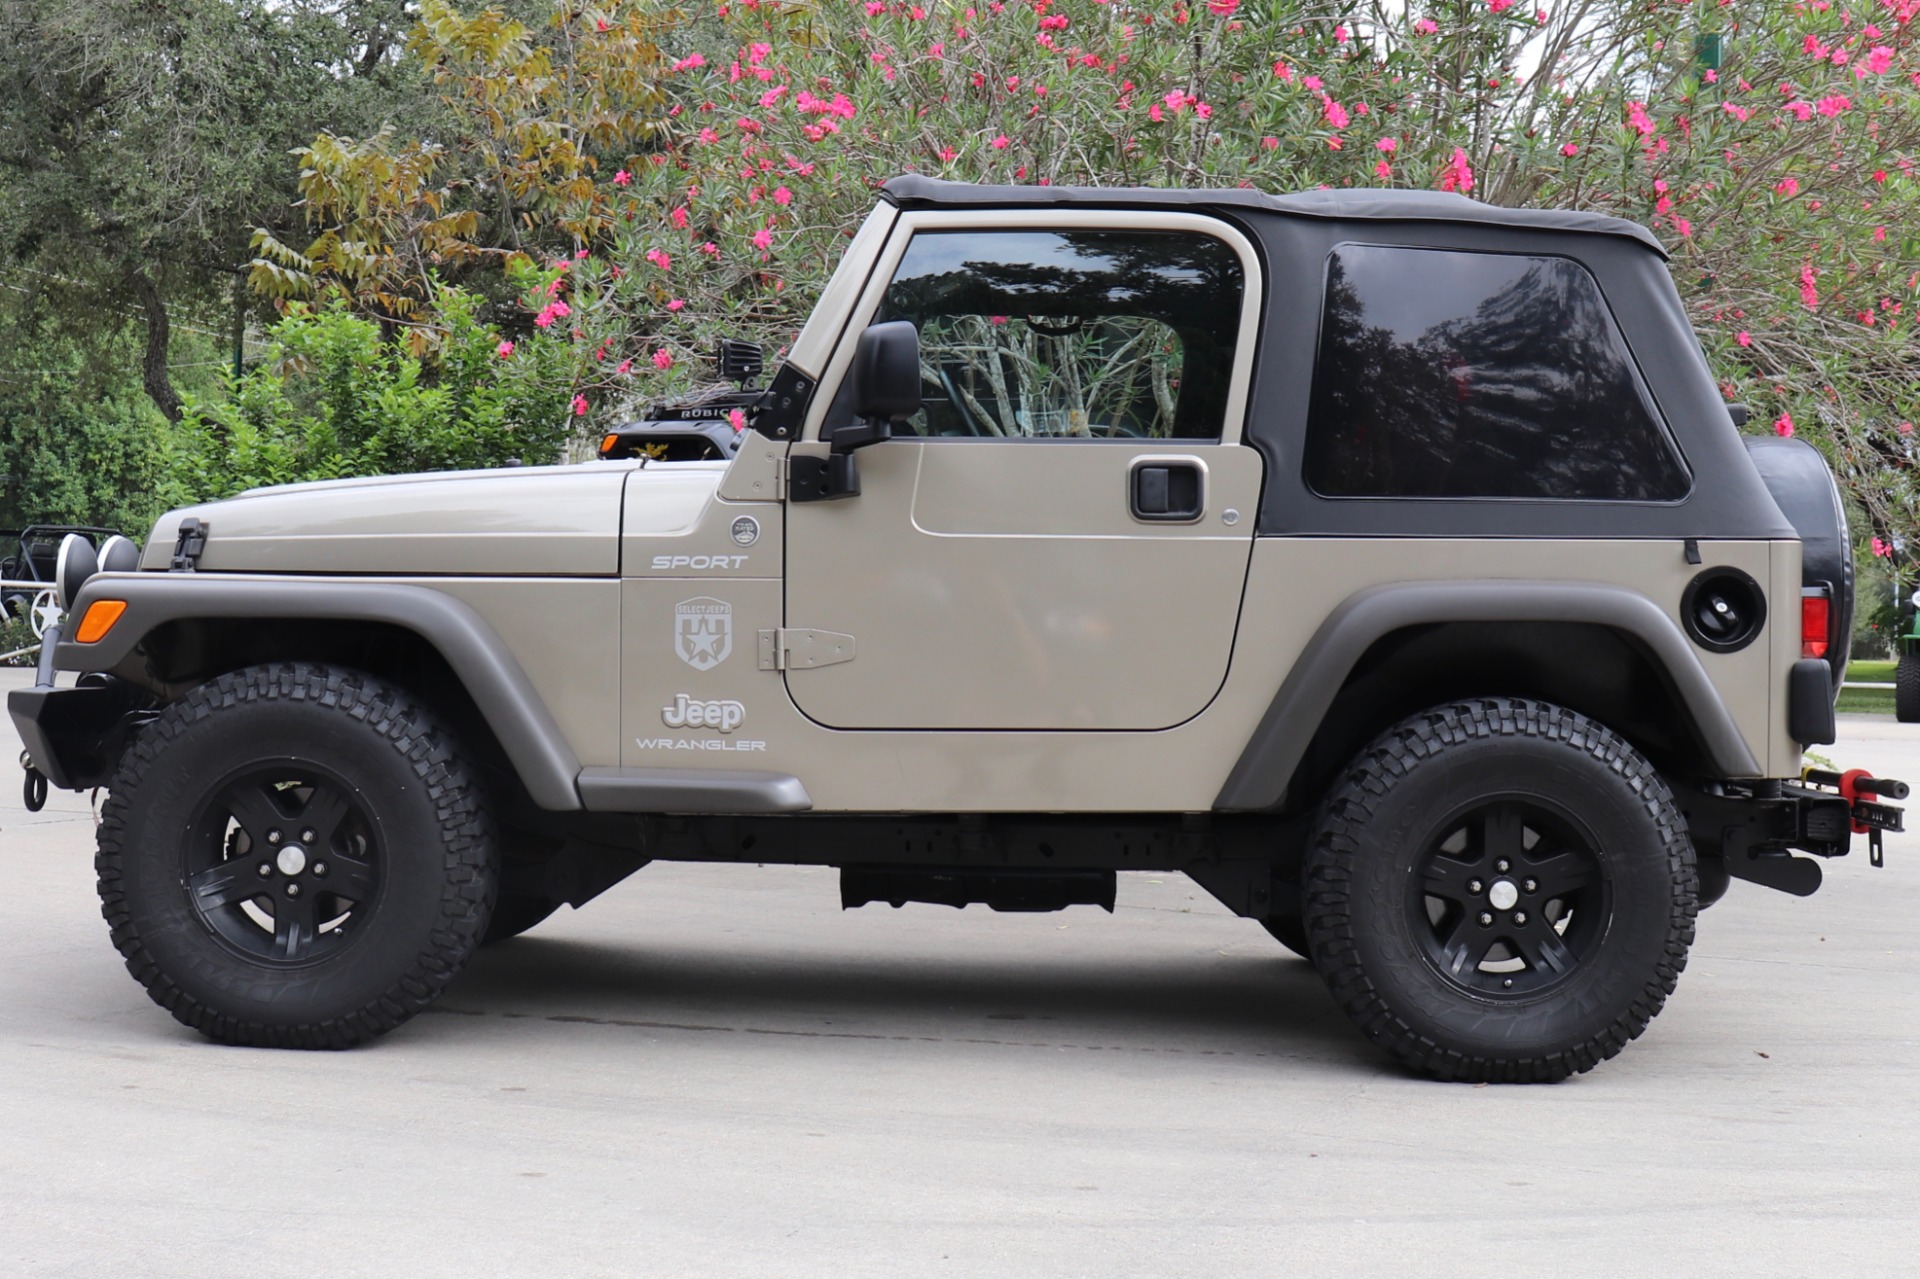 Used 2005 Jeep Wrangler Sport For Sale (Special Pricing) | Select Jeeps